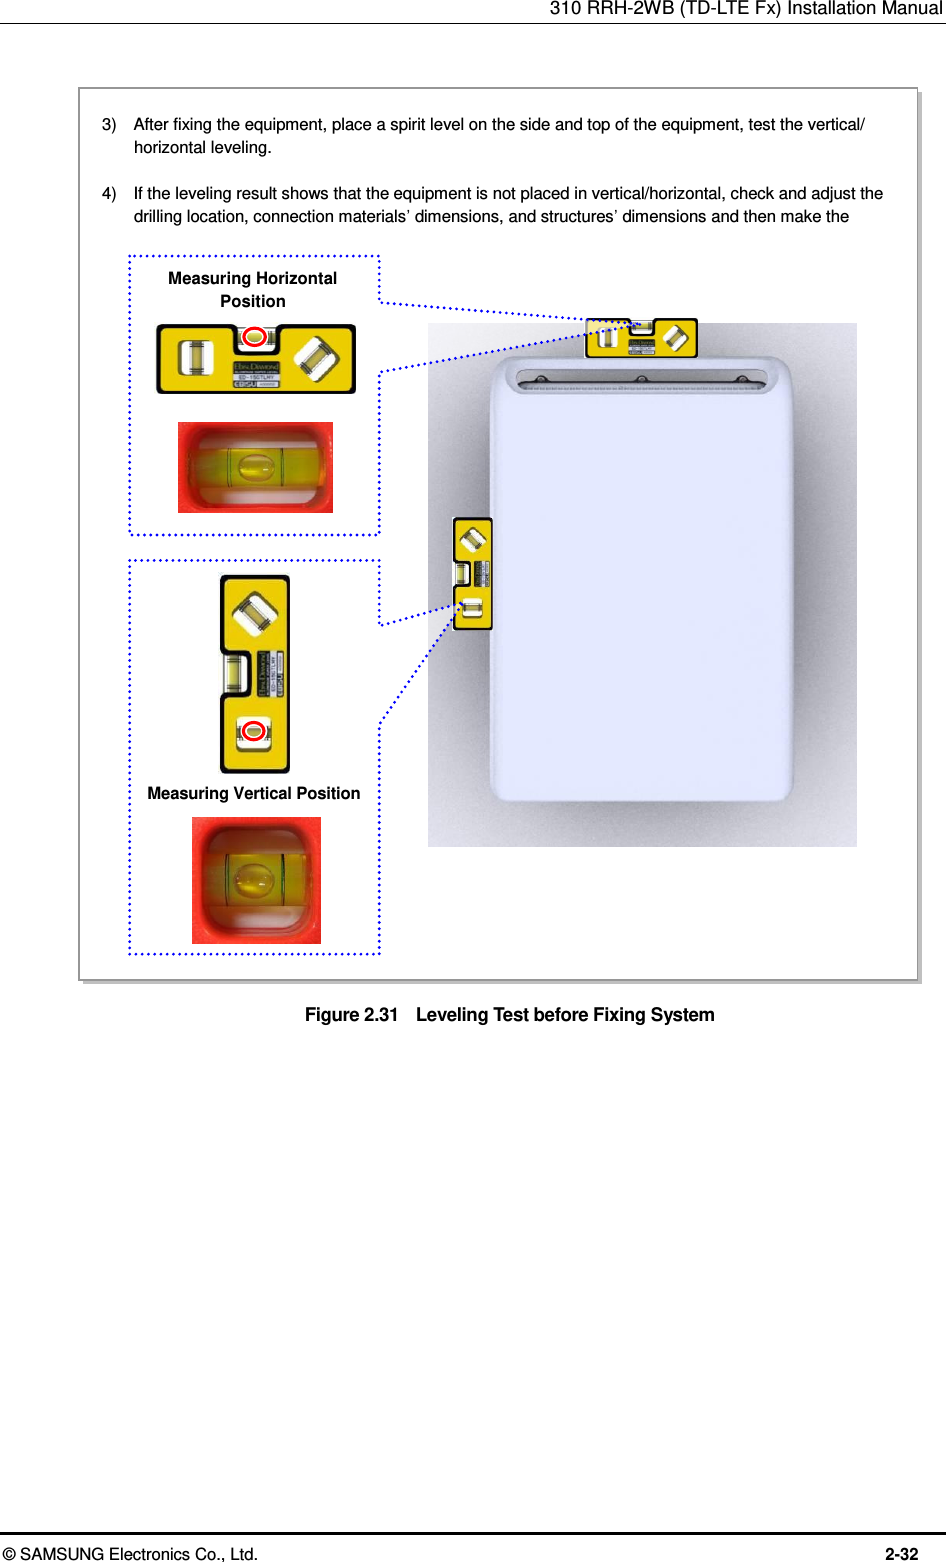 310 RRH-2WB (TD-LTE Fx) Installation Manual  © SAMSUNG Electronics Co., Ltd.  2-32  Figure 2.31    Leveling Test before Fixing System 3)    After fixing the equipment, place a spirit level on the side and top of the equipment, test the vertical/ horizontal leveling.  4)    If the leveling result shows that the equipment is not placed in vertical/horizontal, check and adjust the drilling location, connection materials’ dimensions, and structures’ dimensions and then make the equipment place in vertical/horizontal.  Measuring Horizontal Position   Measuring Vertical Position  